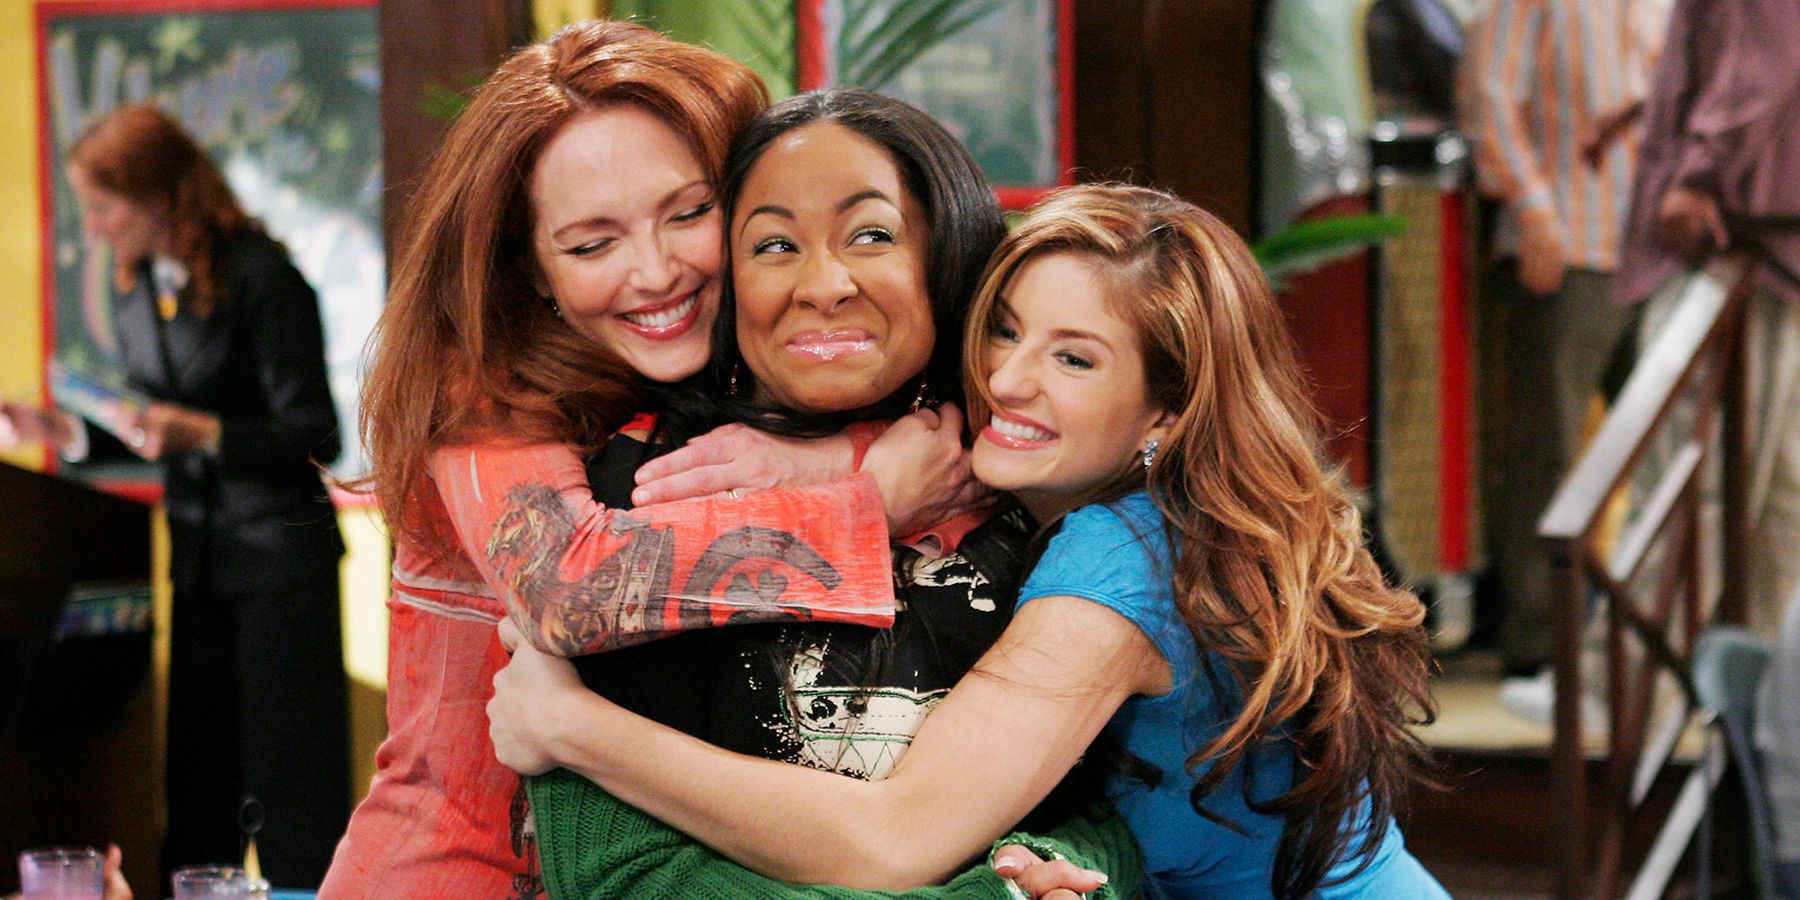 Raven-Symoné hugged by friends in Raven's Home